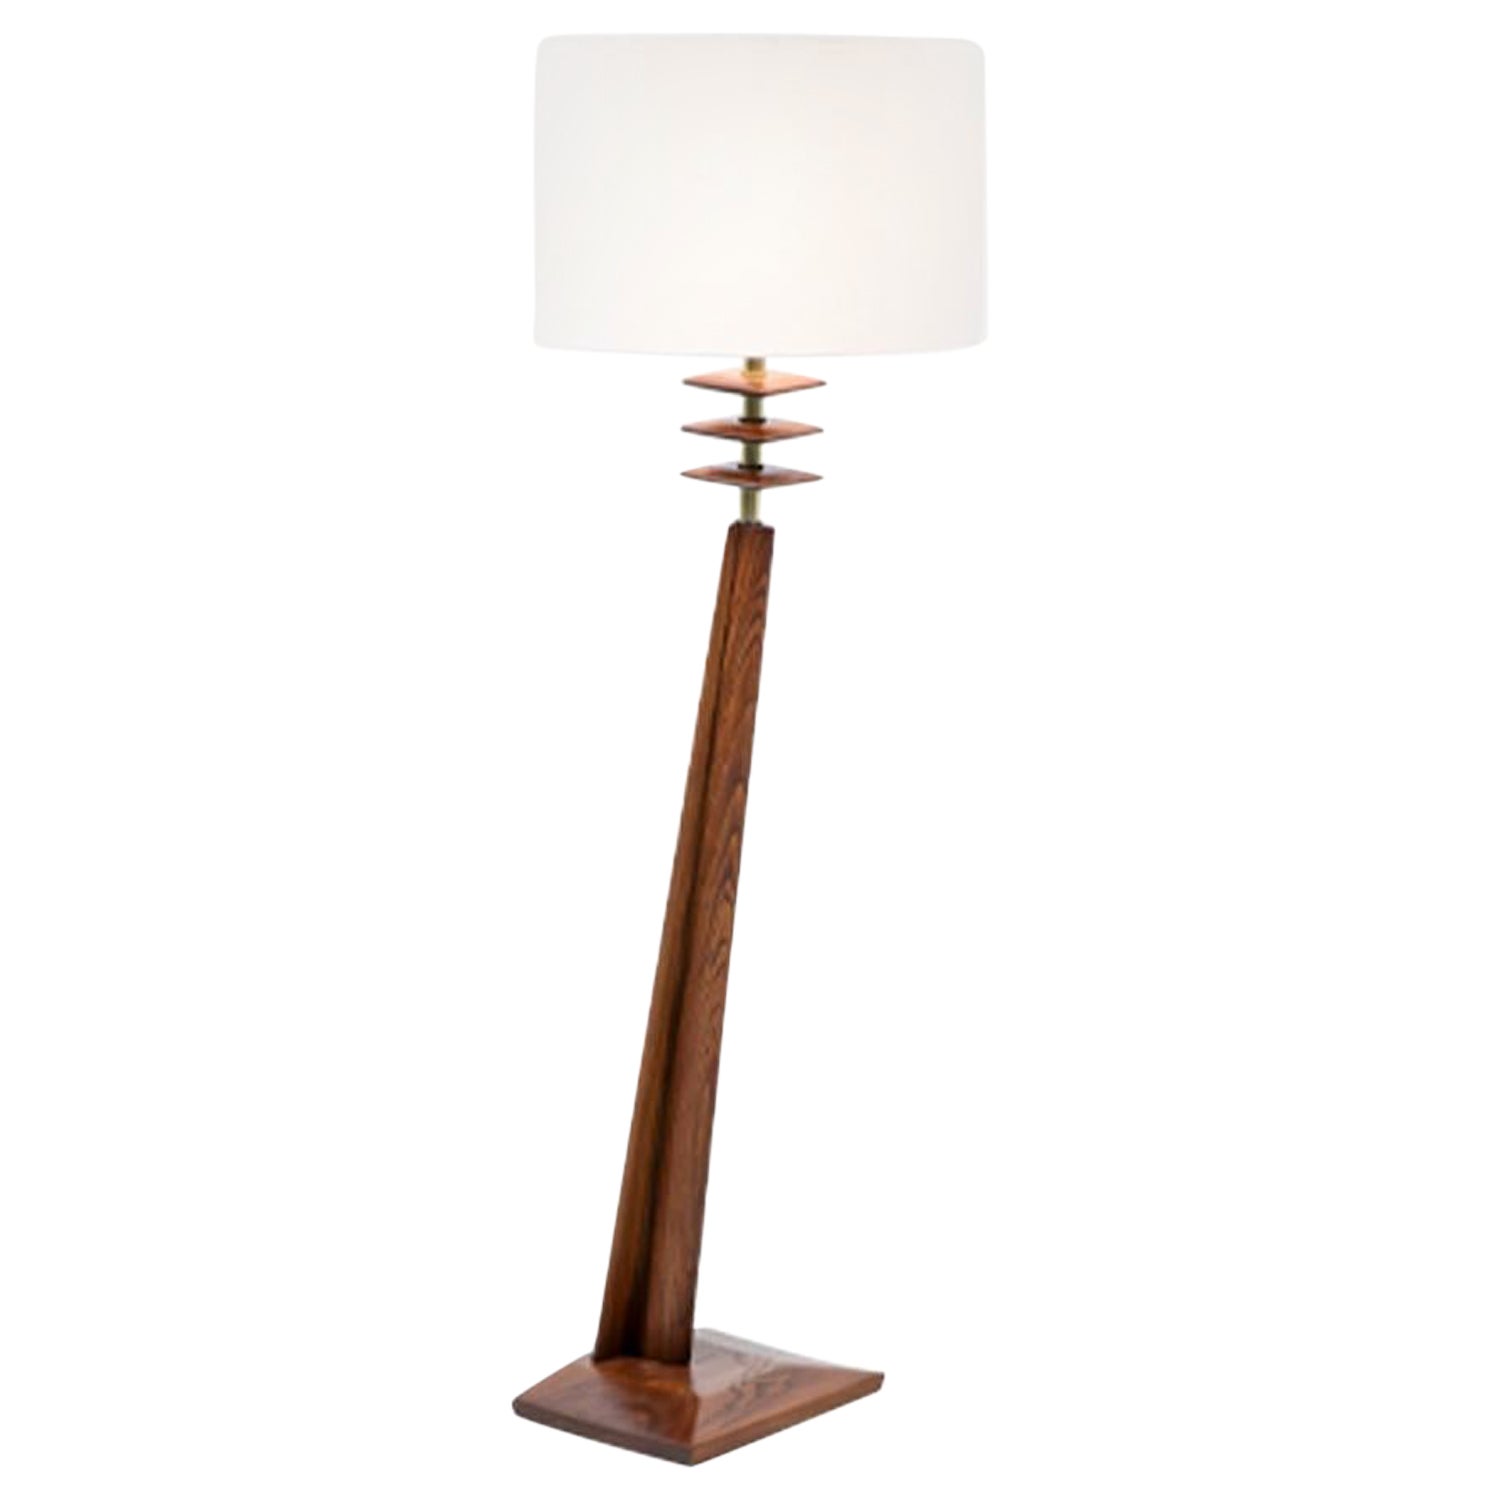  Expertly Restored - Mid-Century Modern Sculpted Floor Lamp with Brass Accents For Sale